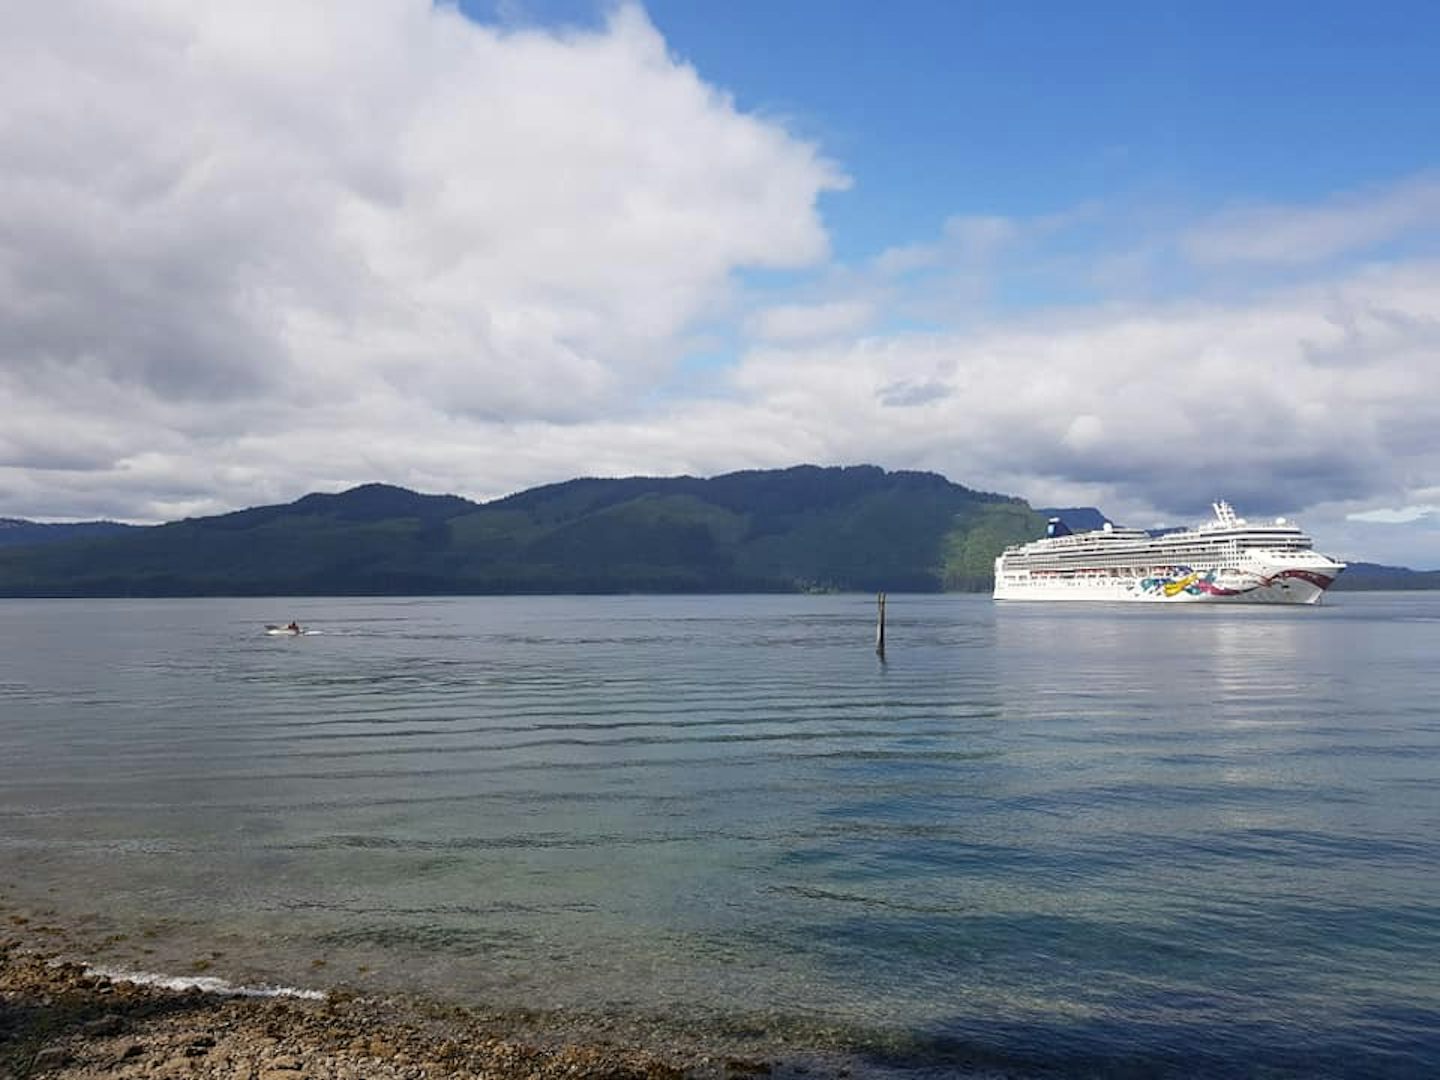 NCL Jewel docked at Icy Strait